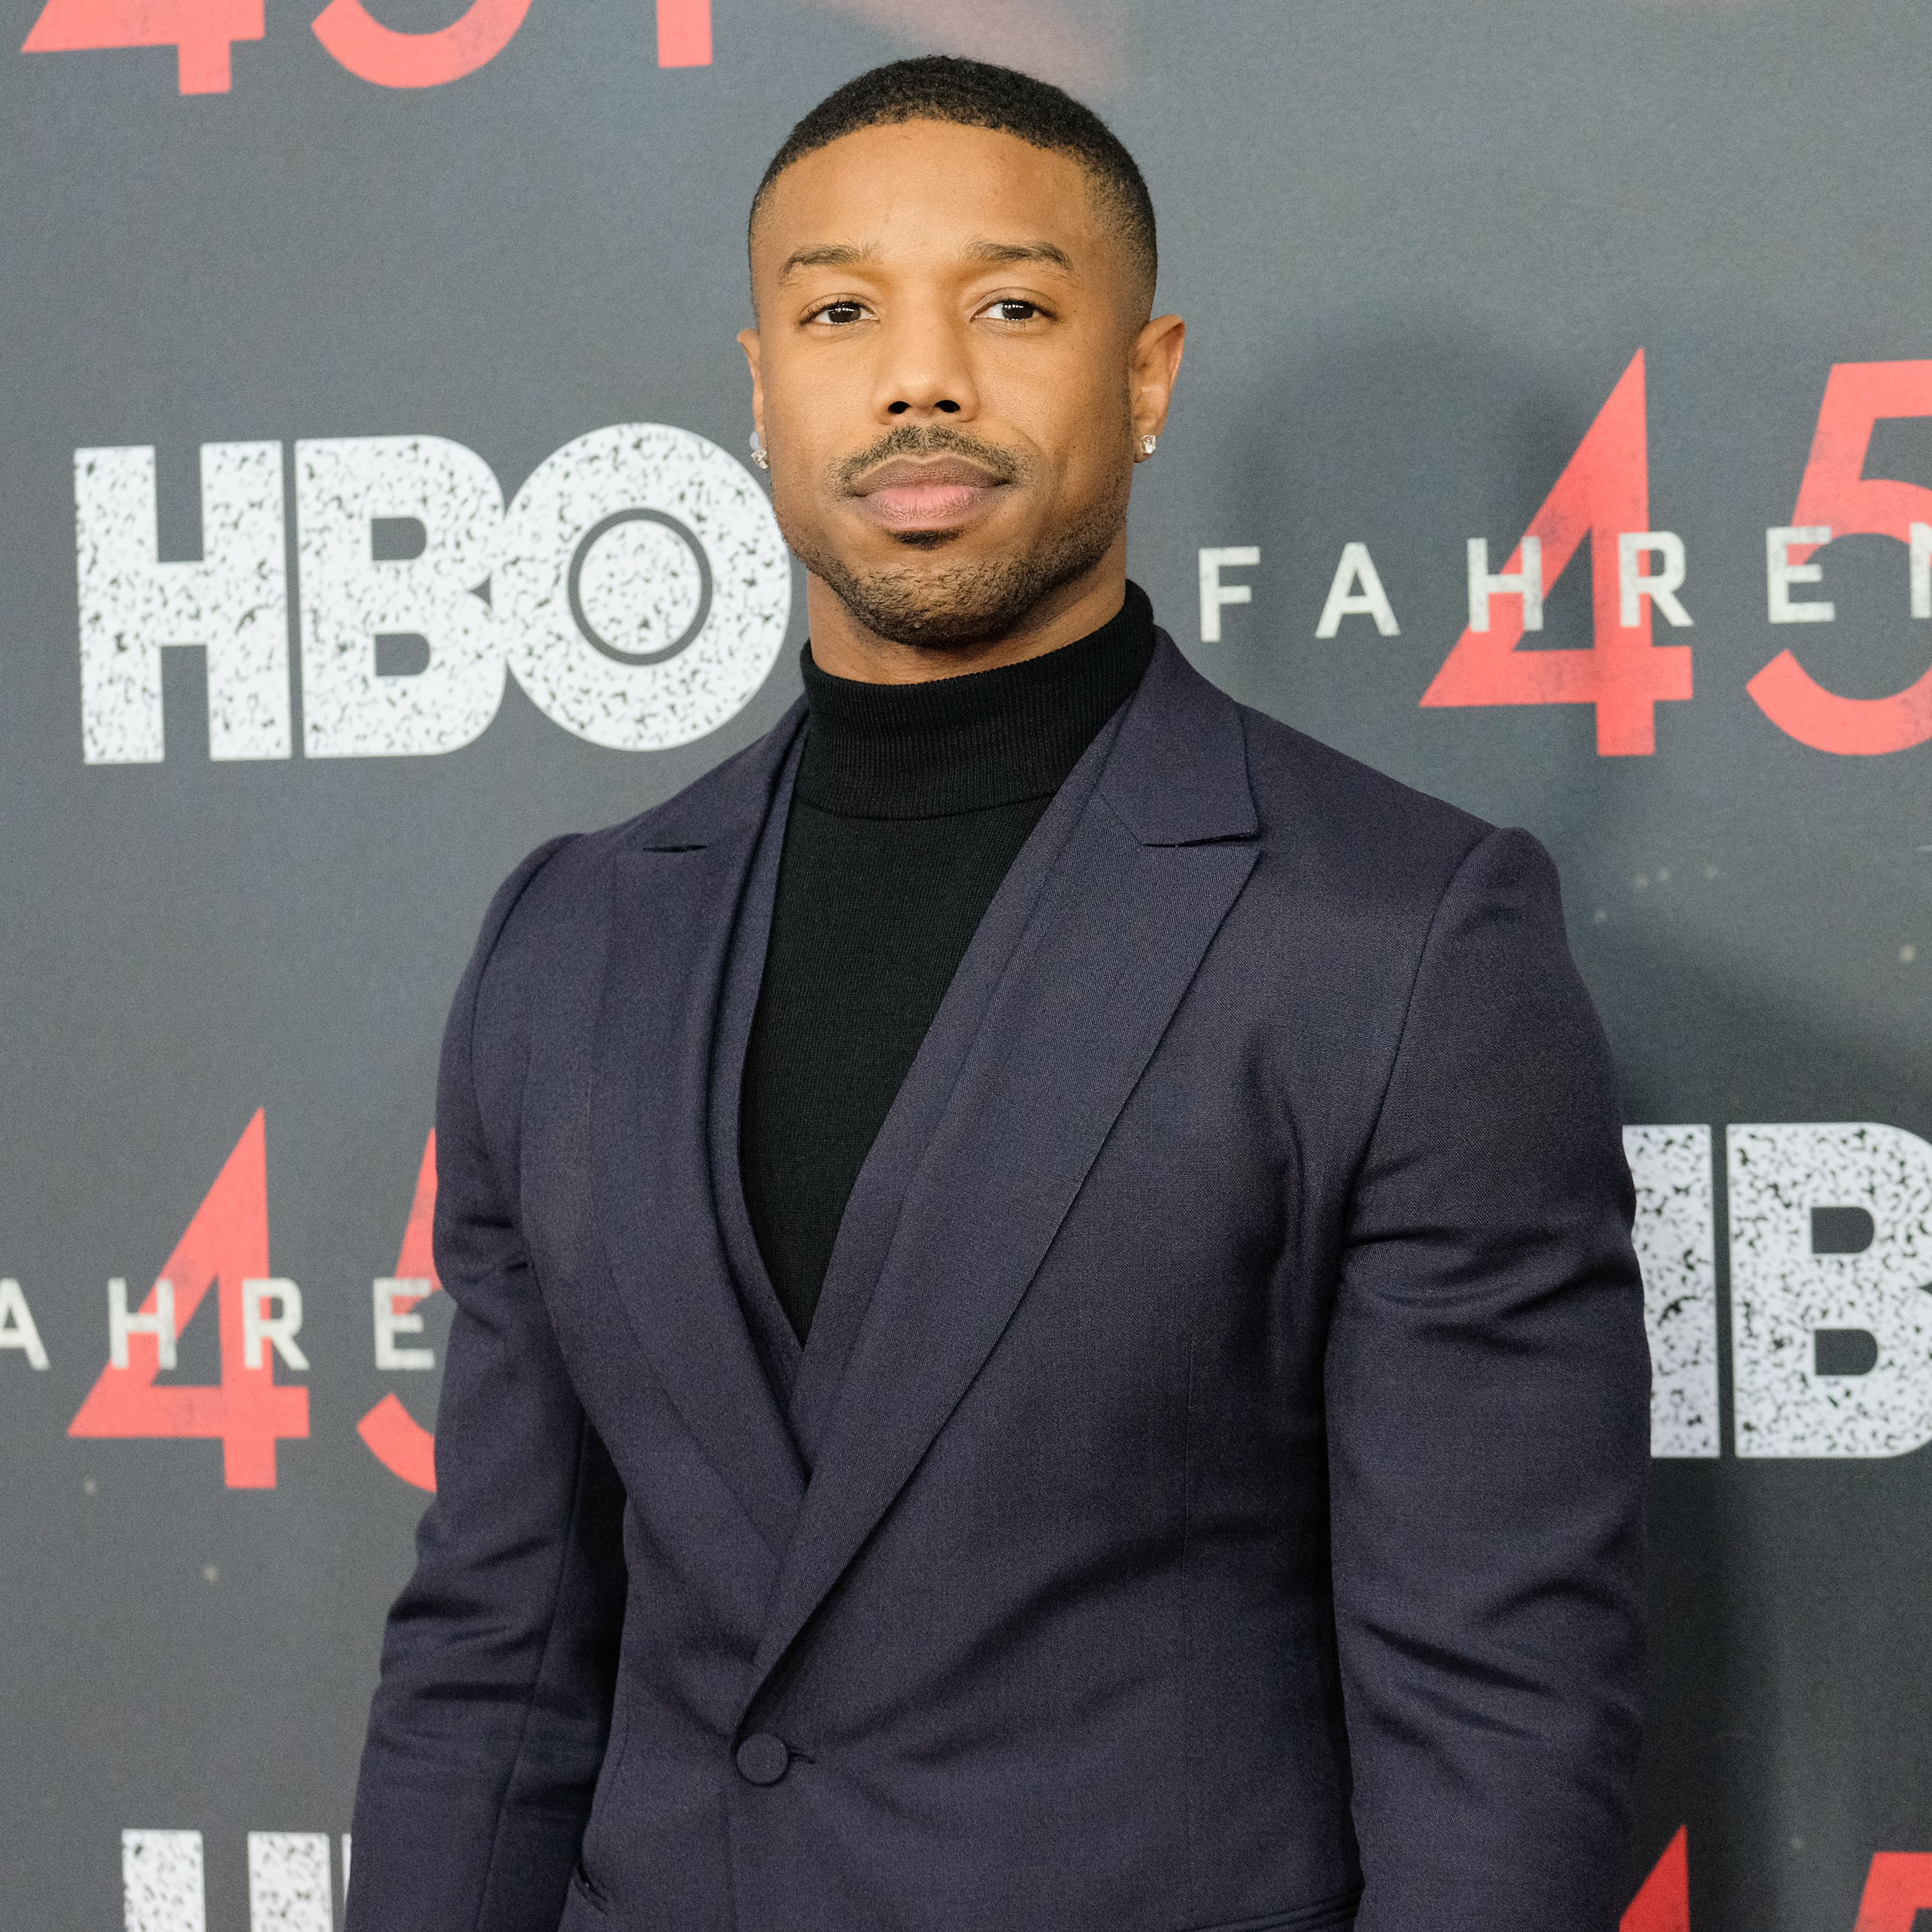 Michael B. Jordan at the "Fahrenheit 451" New York Premiere at NYU Skirball Center on May 8, 2018 | Photo: Getty Images